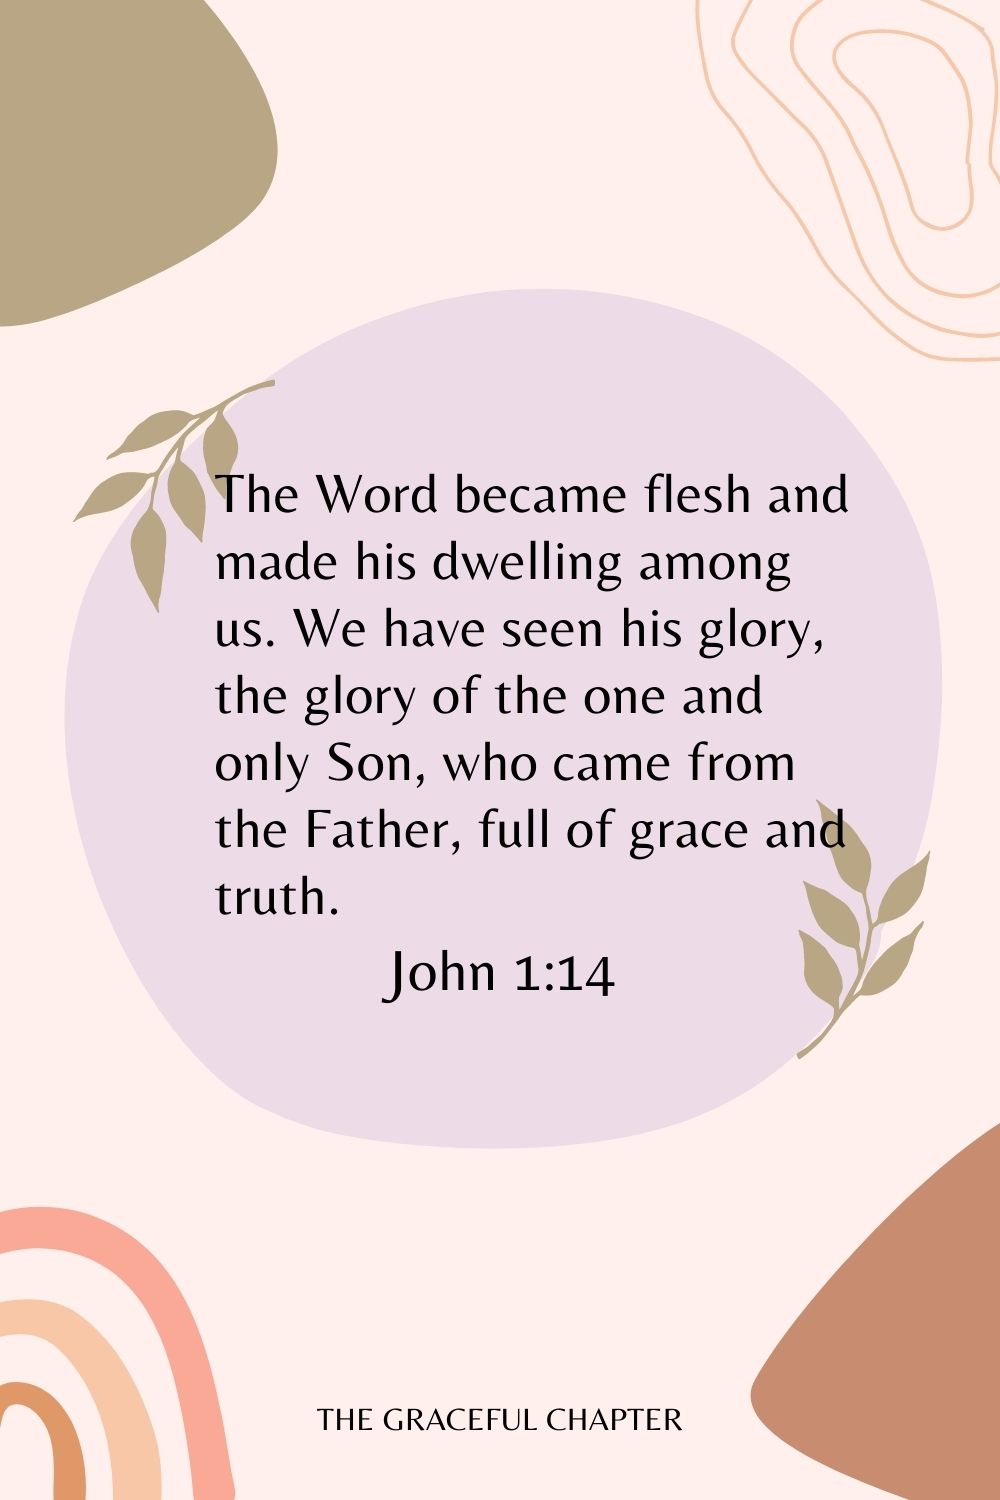 The Word became flesh and made his dwelling among us. We have seen his glory, the glory of the one and only Son, who came from the Father, full of grace and truth. John 1:14